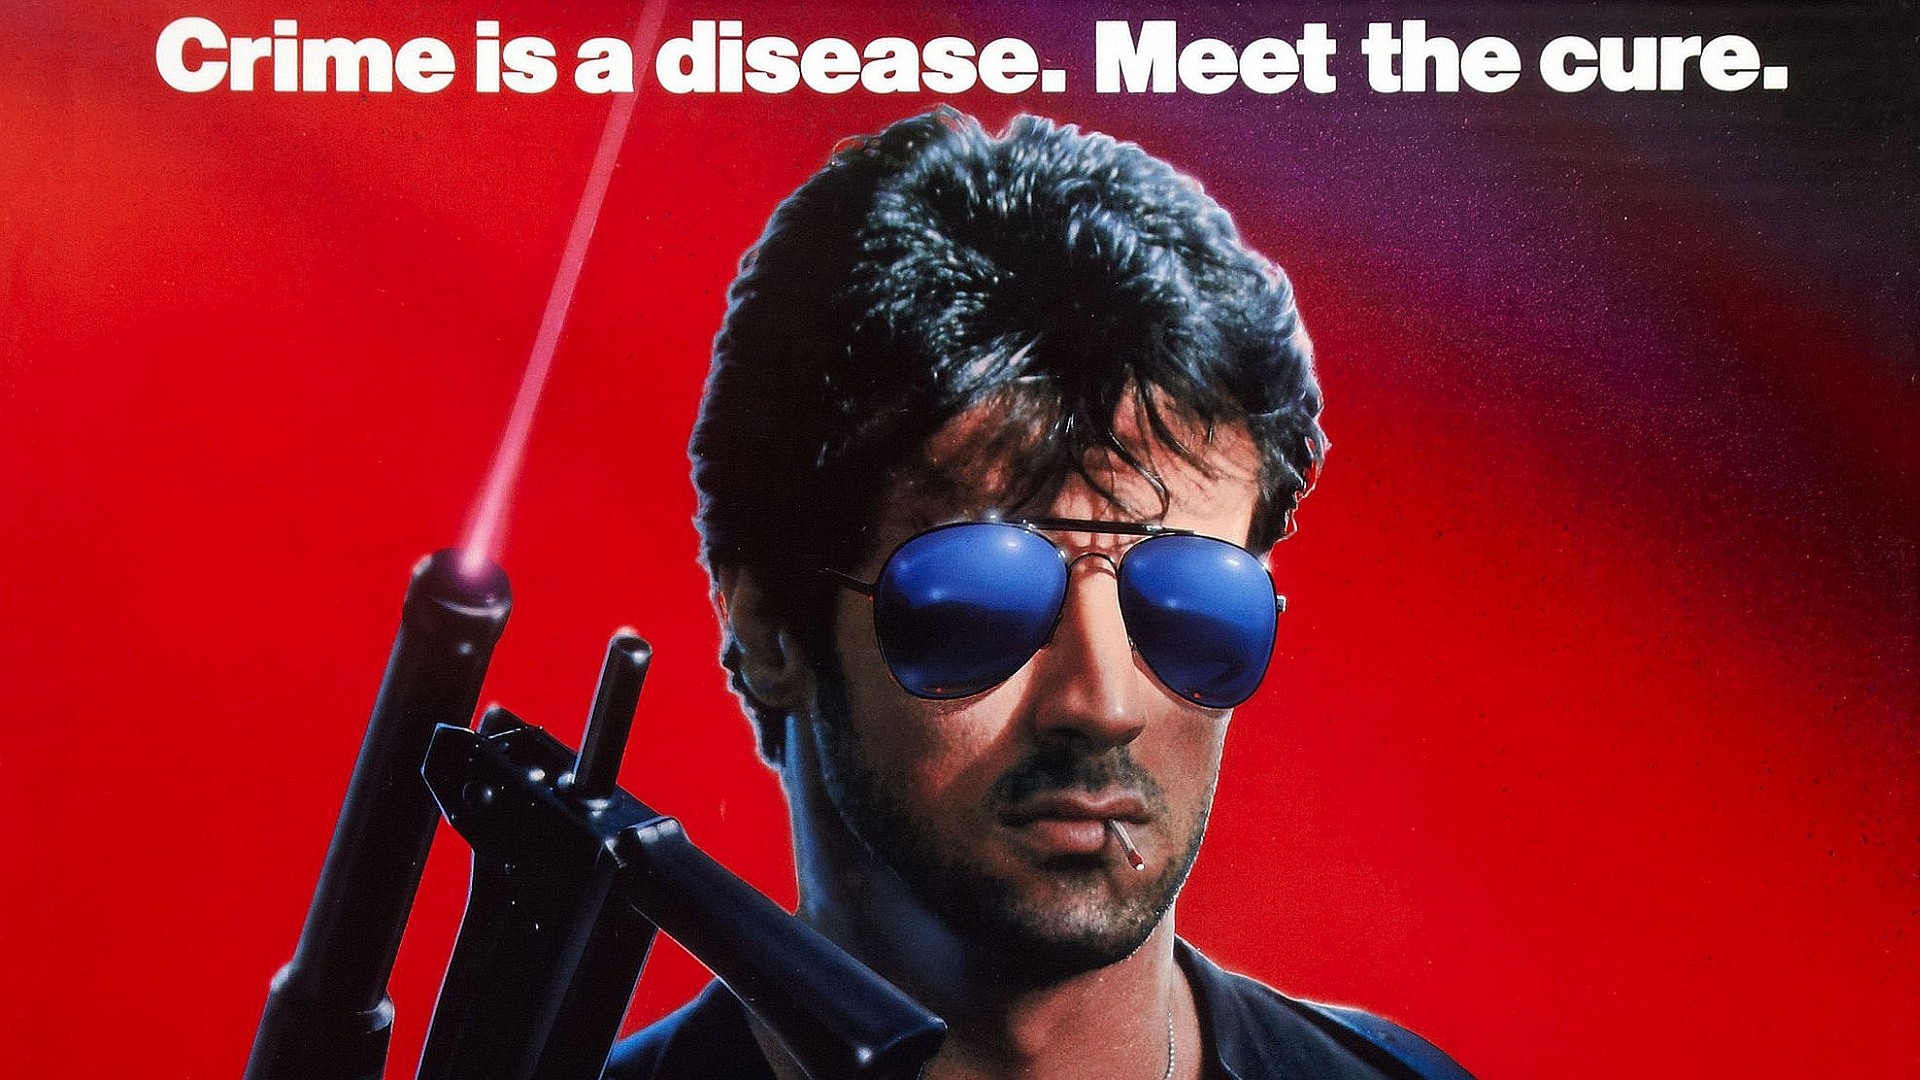 Sylvester Stallone Movies 1986 Year Shades Weapon 1920x1080